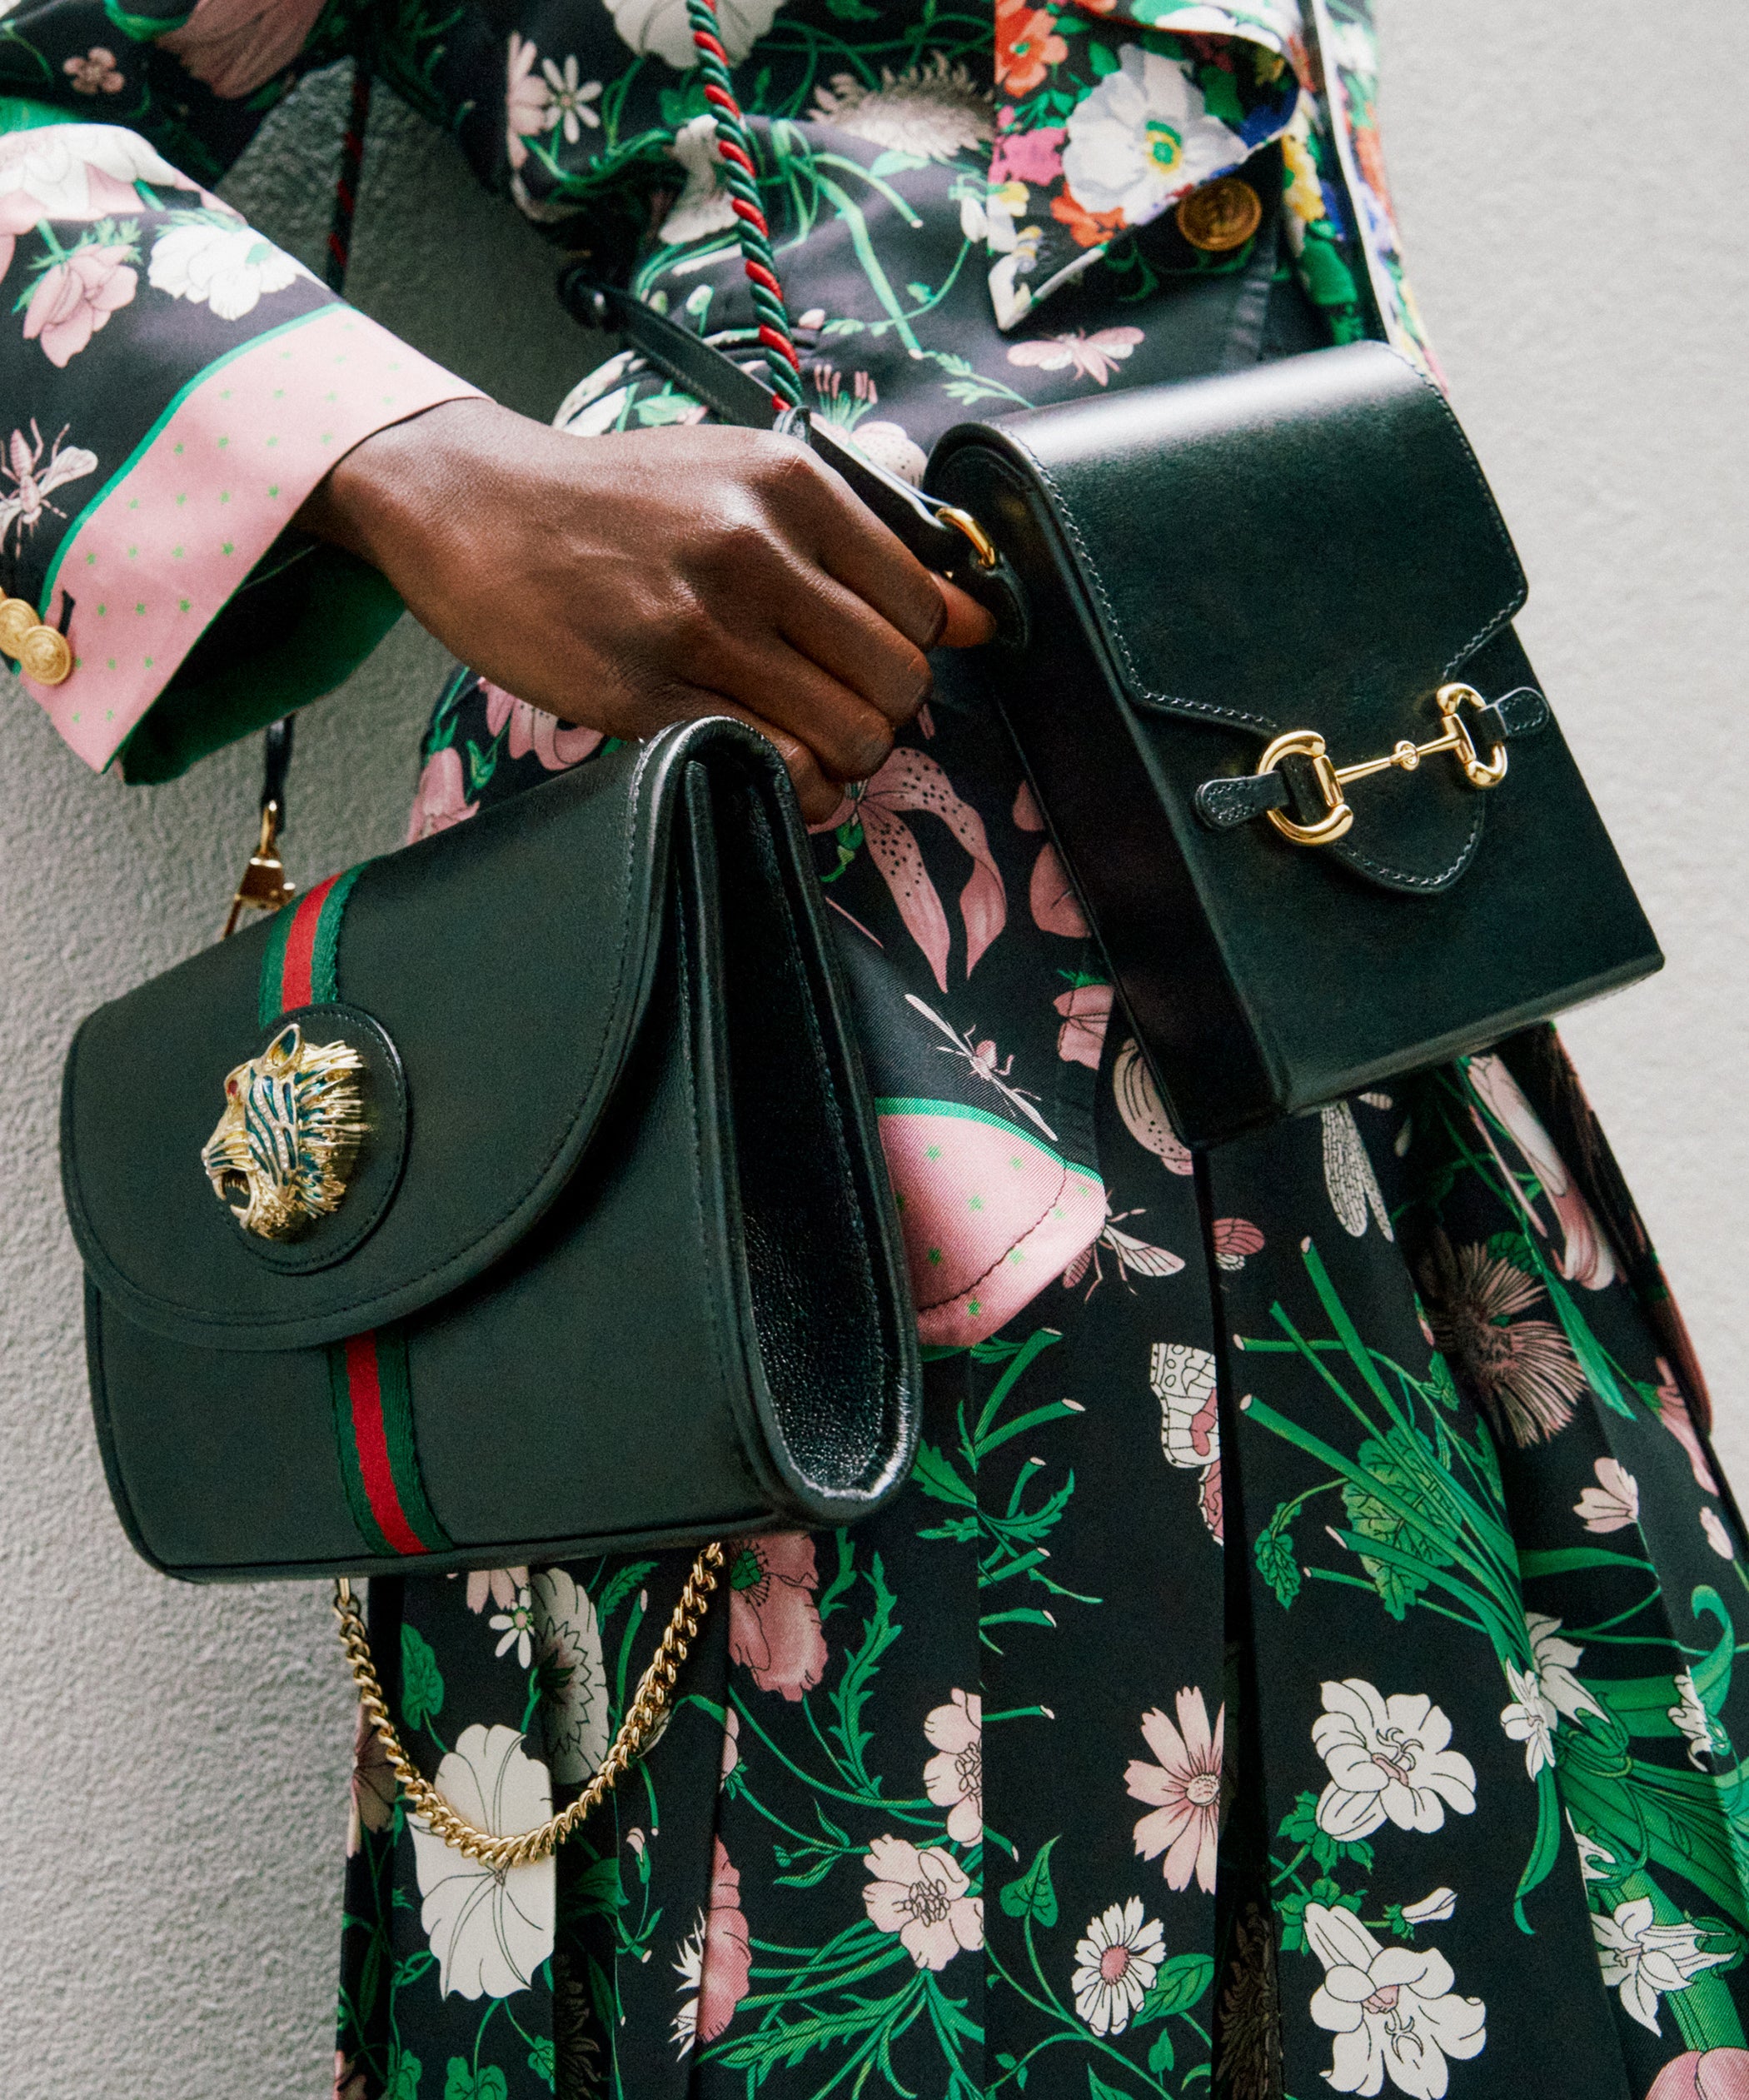 See The Gucci Purse That Is The It Bag Of The Year According To TheRealReal